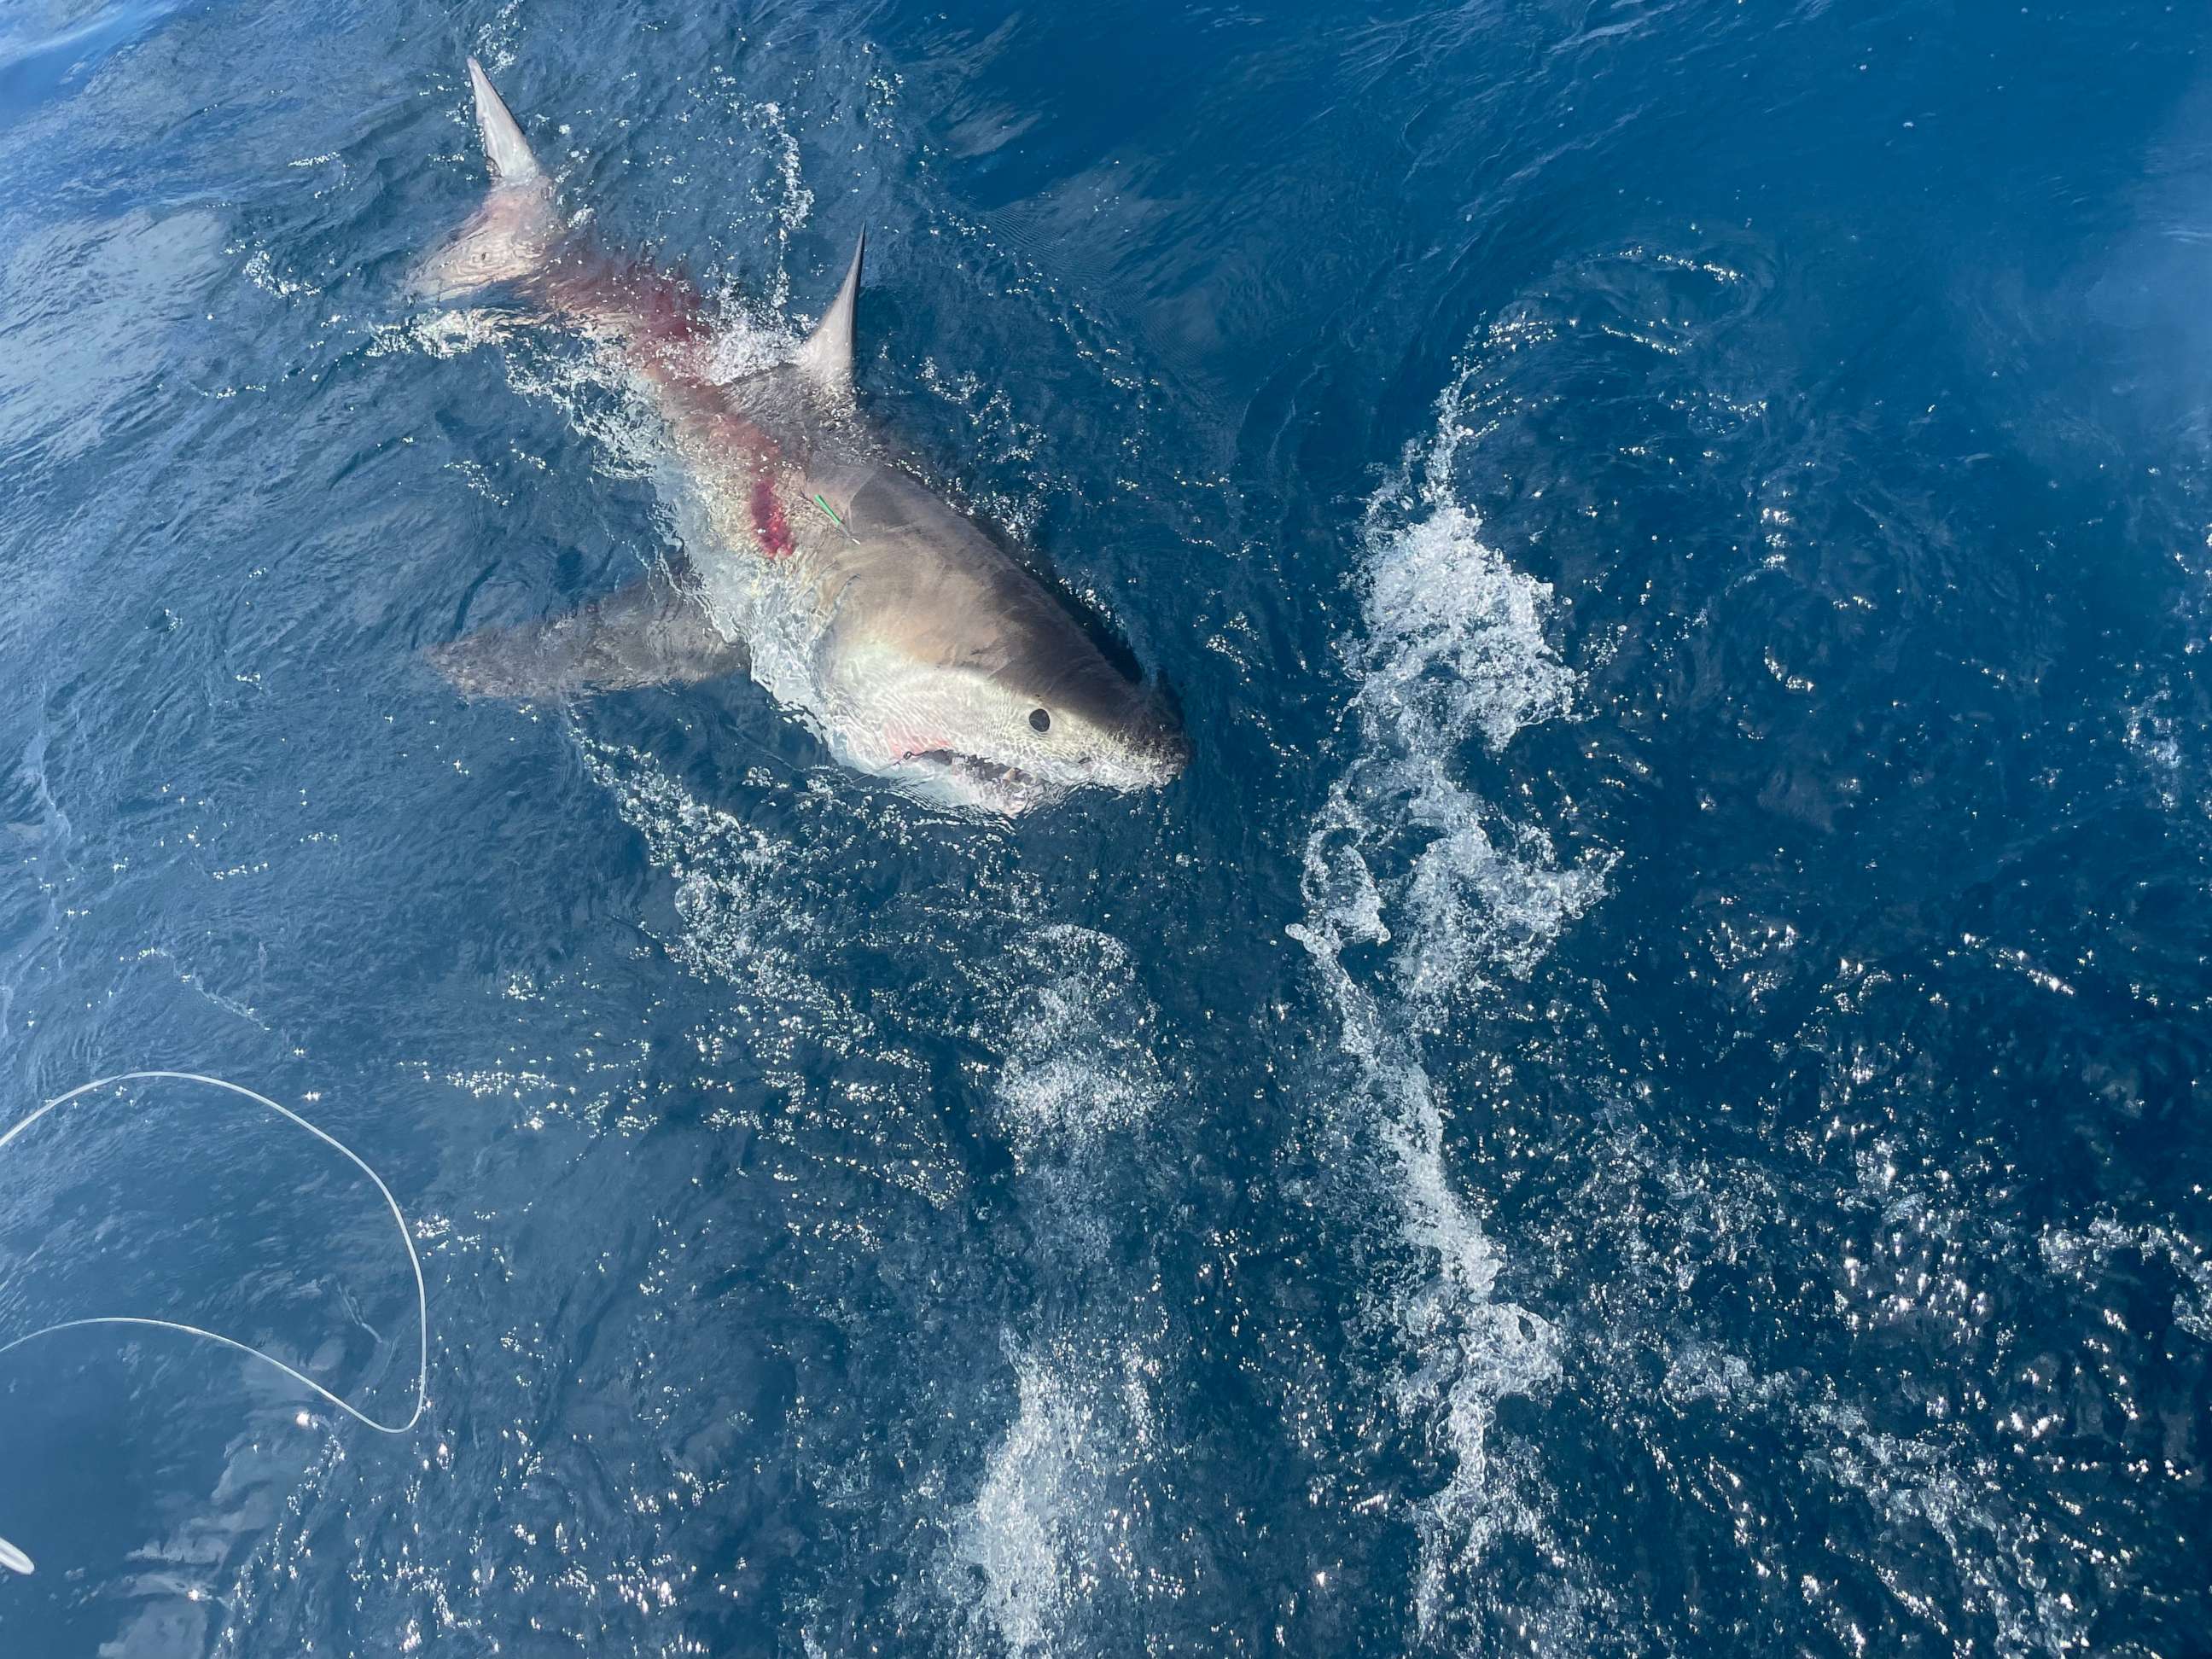 PHOTO: The great white shark caught by 12-year-old Cambell Keenan while fishing in Florida.